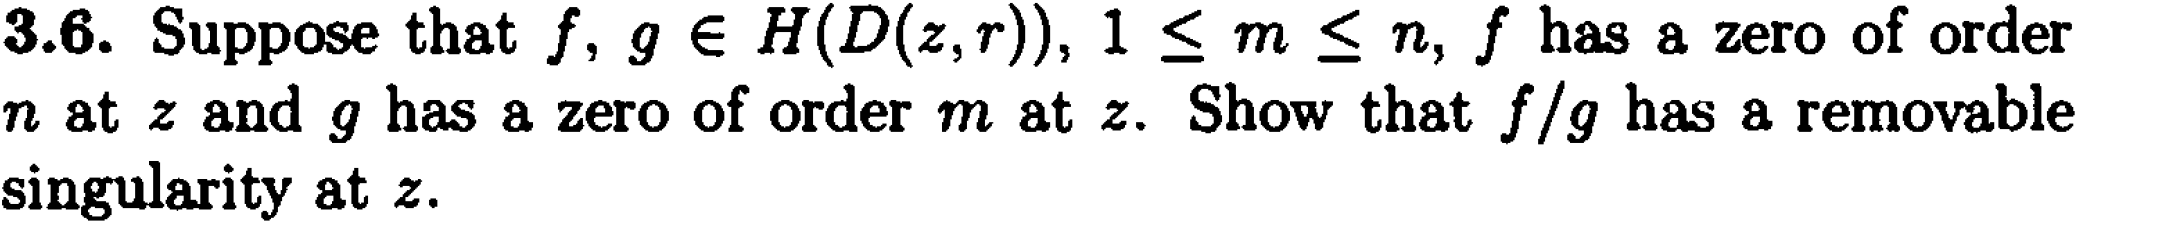 Suppose that f, g € H(D(z, r)), 1 < m < n, f has a zero of order
z and g has a zero of order m at z. Show that f/g has a removable
larity at z.
